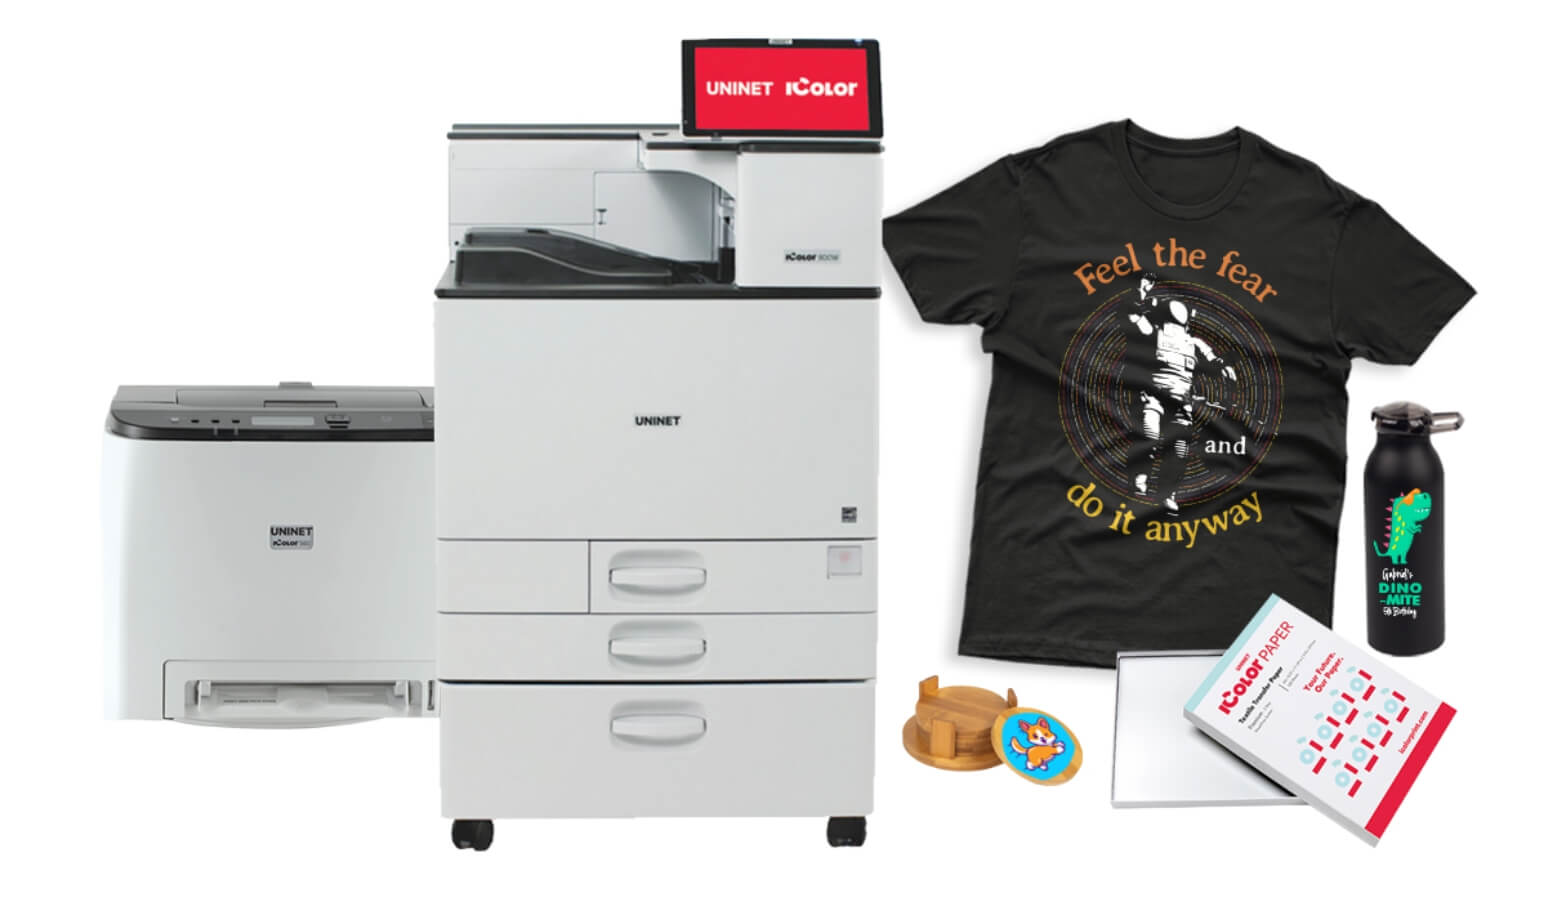 Two different printers, a shirt, and other items for personalization